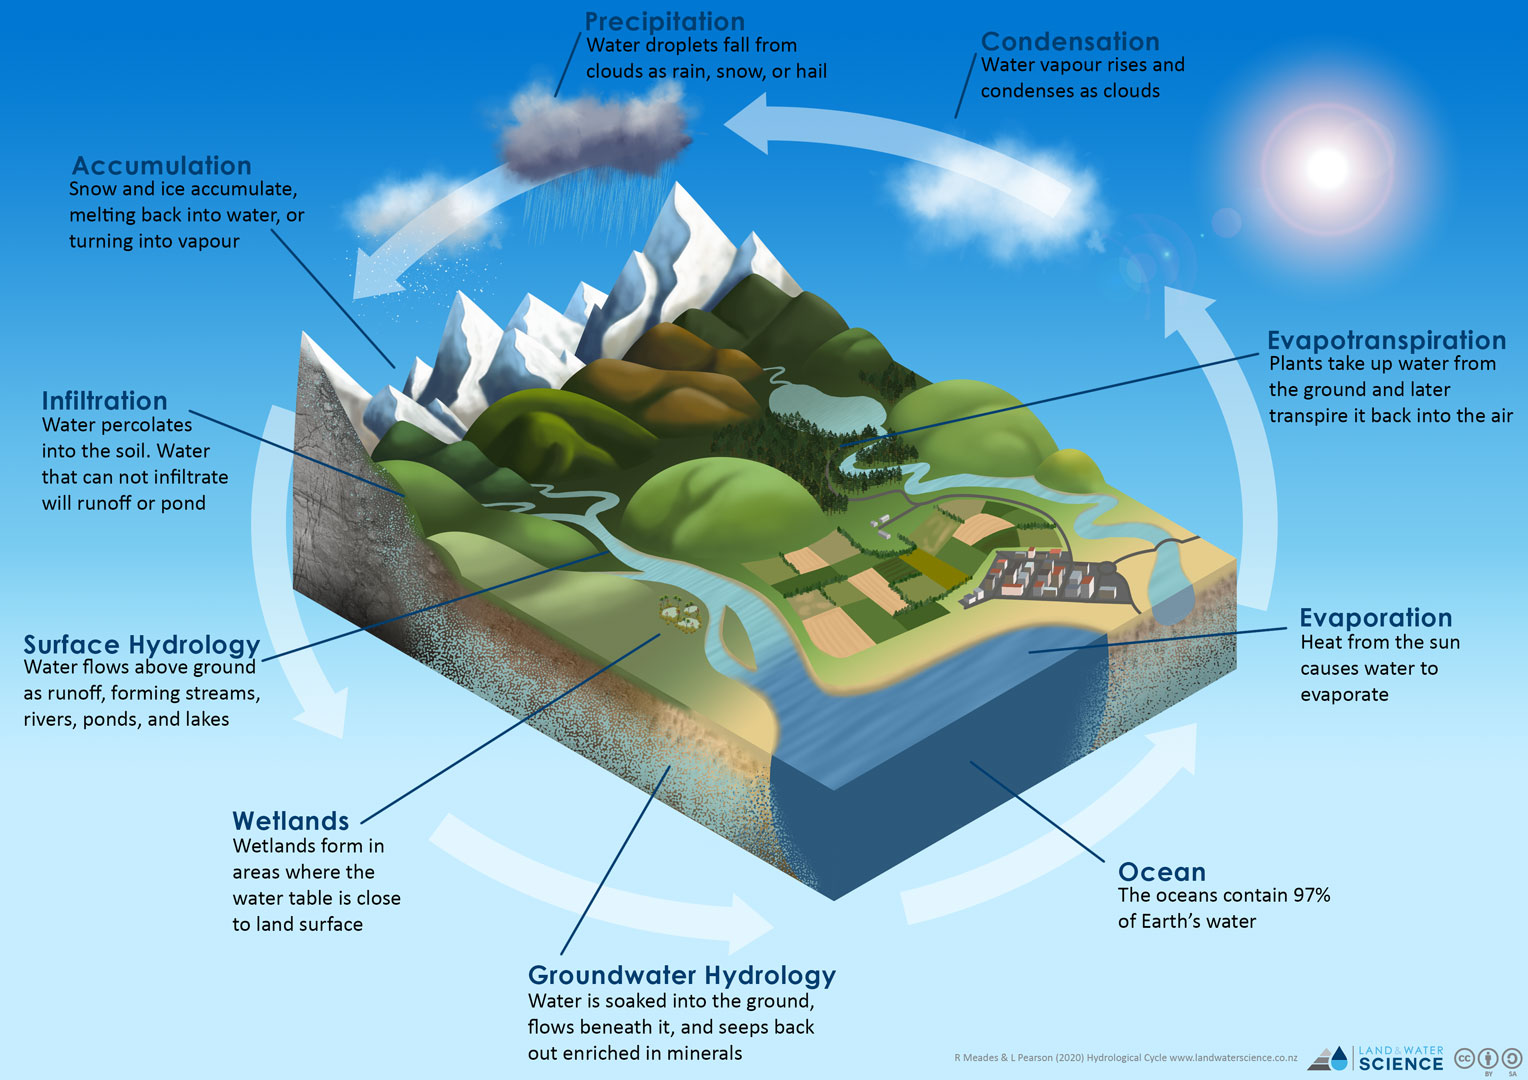 3D diagram of the cycle water takes though the landscape, into the ocean, evaporation, and precipitation.